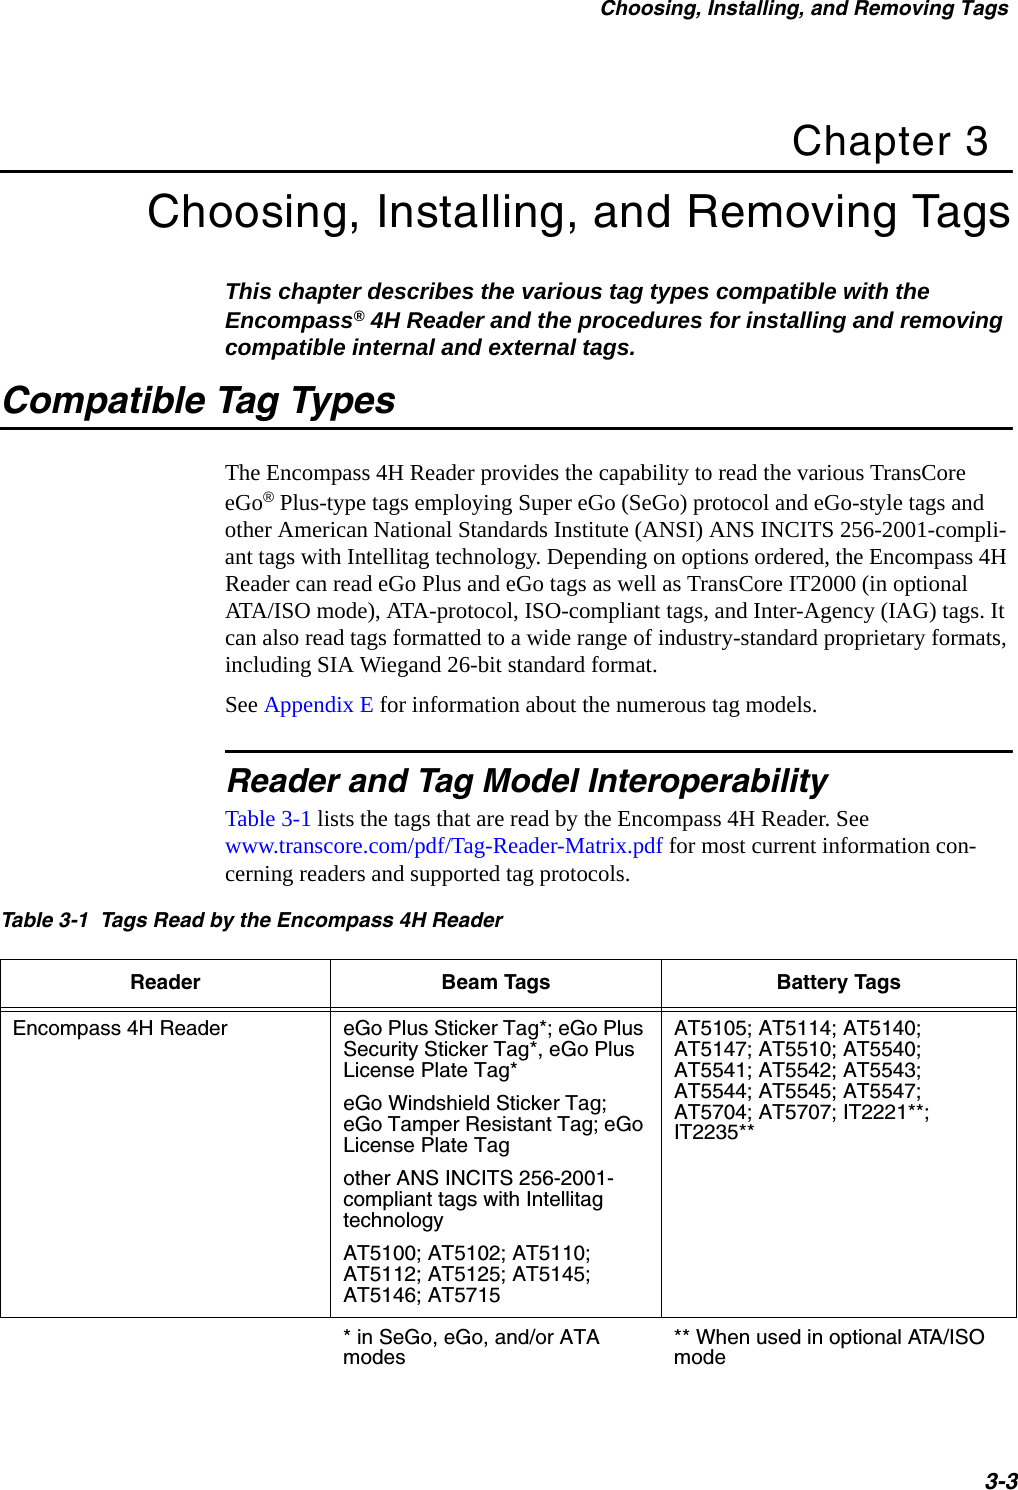 Choosing, Installing, and Removing Tags3-3Chapter 3Choosing, Installing, and Removing TagsThis chapter describes the various tag types compatible with the Encompass® 4H Reader and the procedures for installing and removing compatible internal and external tags. Compatible Tag TypesThe Encompass 4H Reader provides the capability to read the various TransCore eGo® Plus-type tags employing Super eGo (SeGo) protocol and eGo-style tags and other American National Standards Institute (ANSI) ANS INCITS 256-2001-compli-ant tags with Intellitag technology. Depending on options ordered, the Encompass 4H Reader can read eGo Plus and eGo tags as well as TransCore IT2000 (in optional ATA/ISO mode), ATA-protocol, ISO-compliant tags, and Inter-Agency (IAG) tags. It can also read tags formatted to a wide range of industry-standard proprietary formats, including SIA Wiegand 26-bit standard format.See Appendix E for information about the numerous tag models.Reader and Tag Model InteroperabilityTable 3-1 lists the tags that are read by the Encompass 4H Reader. See www.transcore.com/pdf/Tag-Reader-Matrix.pdf for most current information con-cerning readers and supported tag protocols.Table 3-1  Tags Read by the Encompass 4H ReaderReader Beam Tags Battery TagsEncompass 4H Reader eGo Plus Sticker Tag*; eGo Plus Security Sticker Tag*, eGo Plus License Plate Tag*eGo Windshield Sticker Tag; eGo Tamper Resistant Tag; eGo License Plate Tagother ANS INCITS 256-2001-compliant tags with Intellitag technologyAT5100; AT5102; AT5110; AT5112; AT5125; AT5145; AT5146; AT5715AT5105; AT5114; AT5140; AT5147; AT5510; AT5540; AT5541; AT5542; AT5543; AT5544; AT5545; AT5547; AT5704; AT5707; IT2221**; IT2235*** in SeGo, eGo, and/or ATA modes** When used in optional ATA/ISO mode